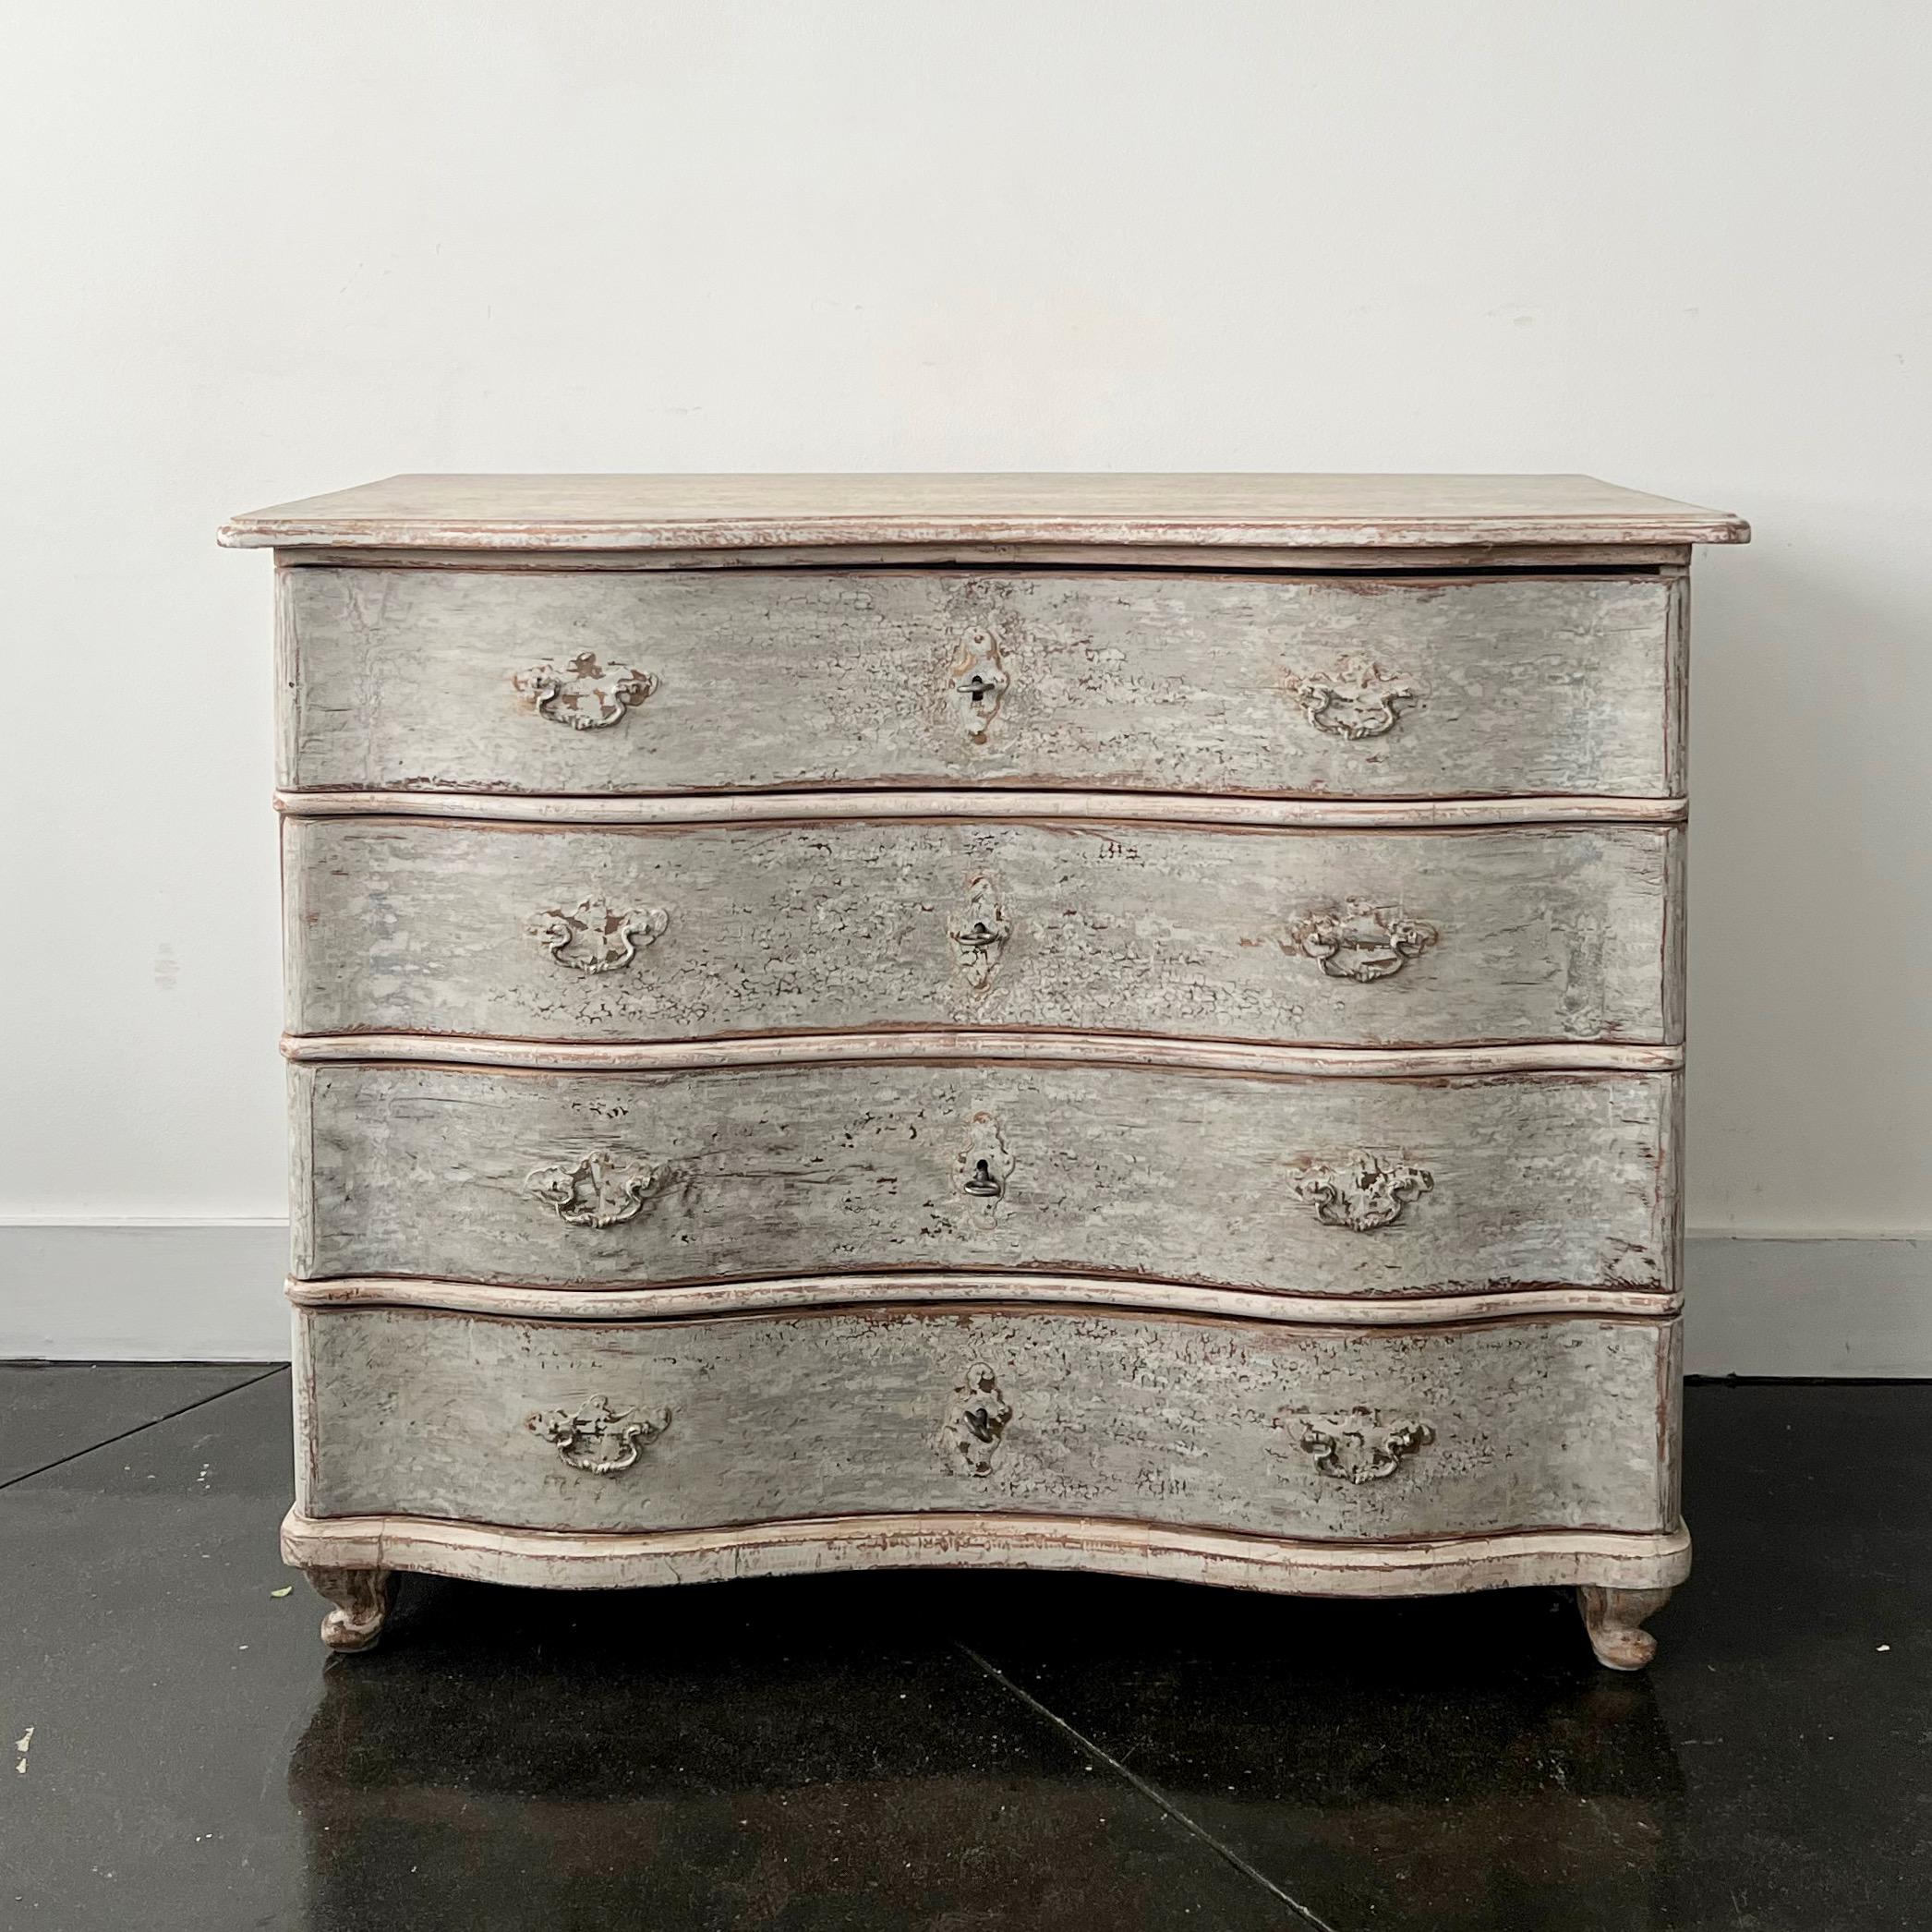 18th century Large chest of four drawers from late Baroque period in richly carved curvaceous serpentine drawer fronts, shaped top and carved feet in super later patinated paint.
Germany
More than ever, we selected the best, the rarest, the